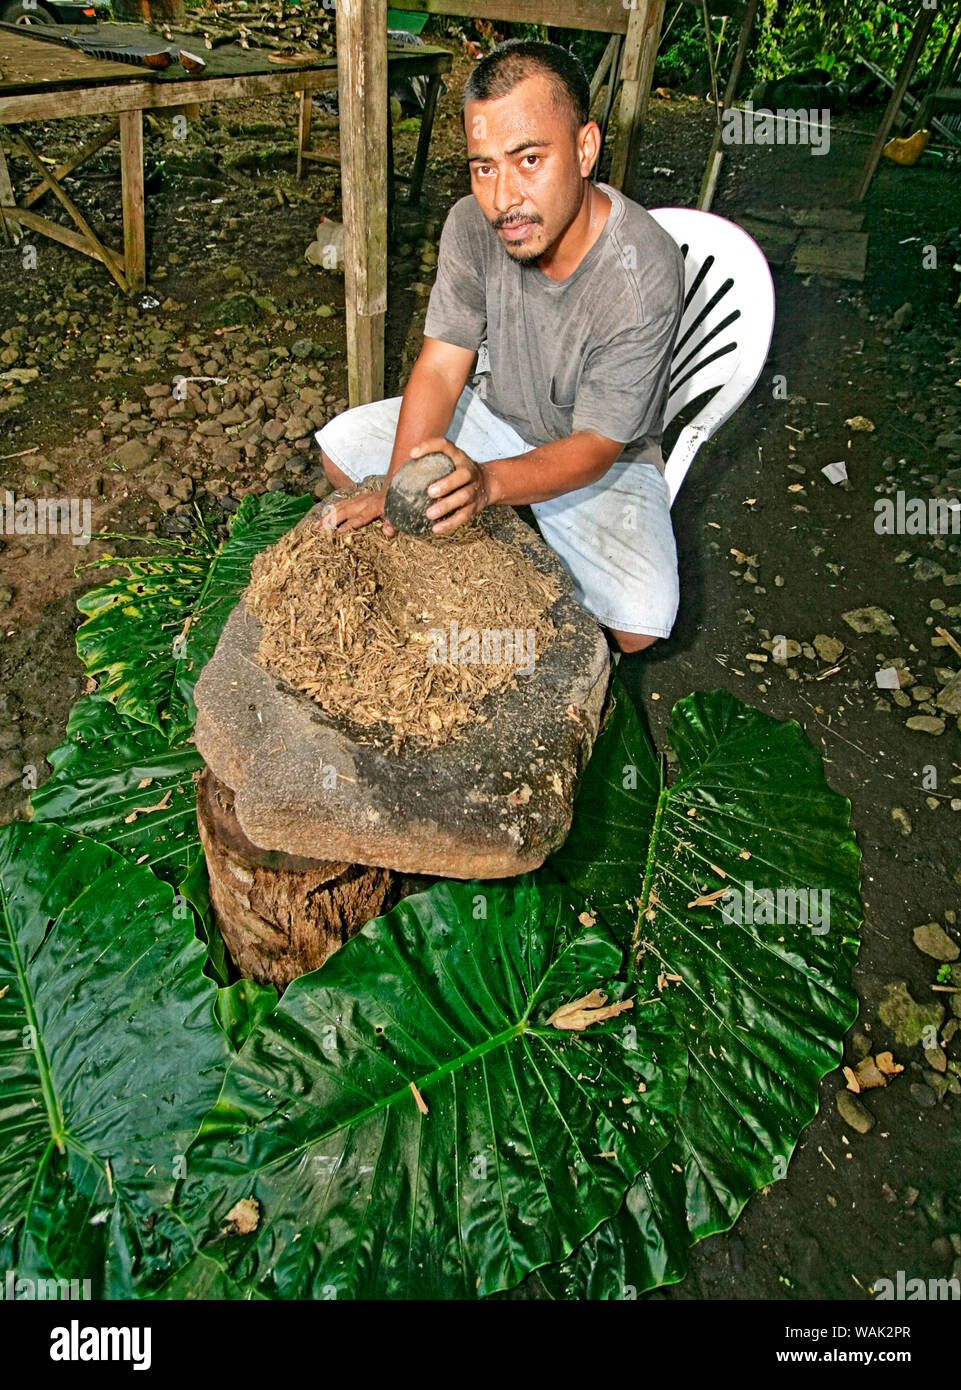 Kosrae, Micronesia (FSM). Man pounds sakau (kava), root used to make a mildly intoxicating and relaxing drink. (Editorial Use Only) Stock Photo